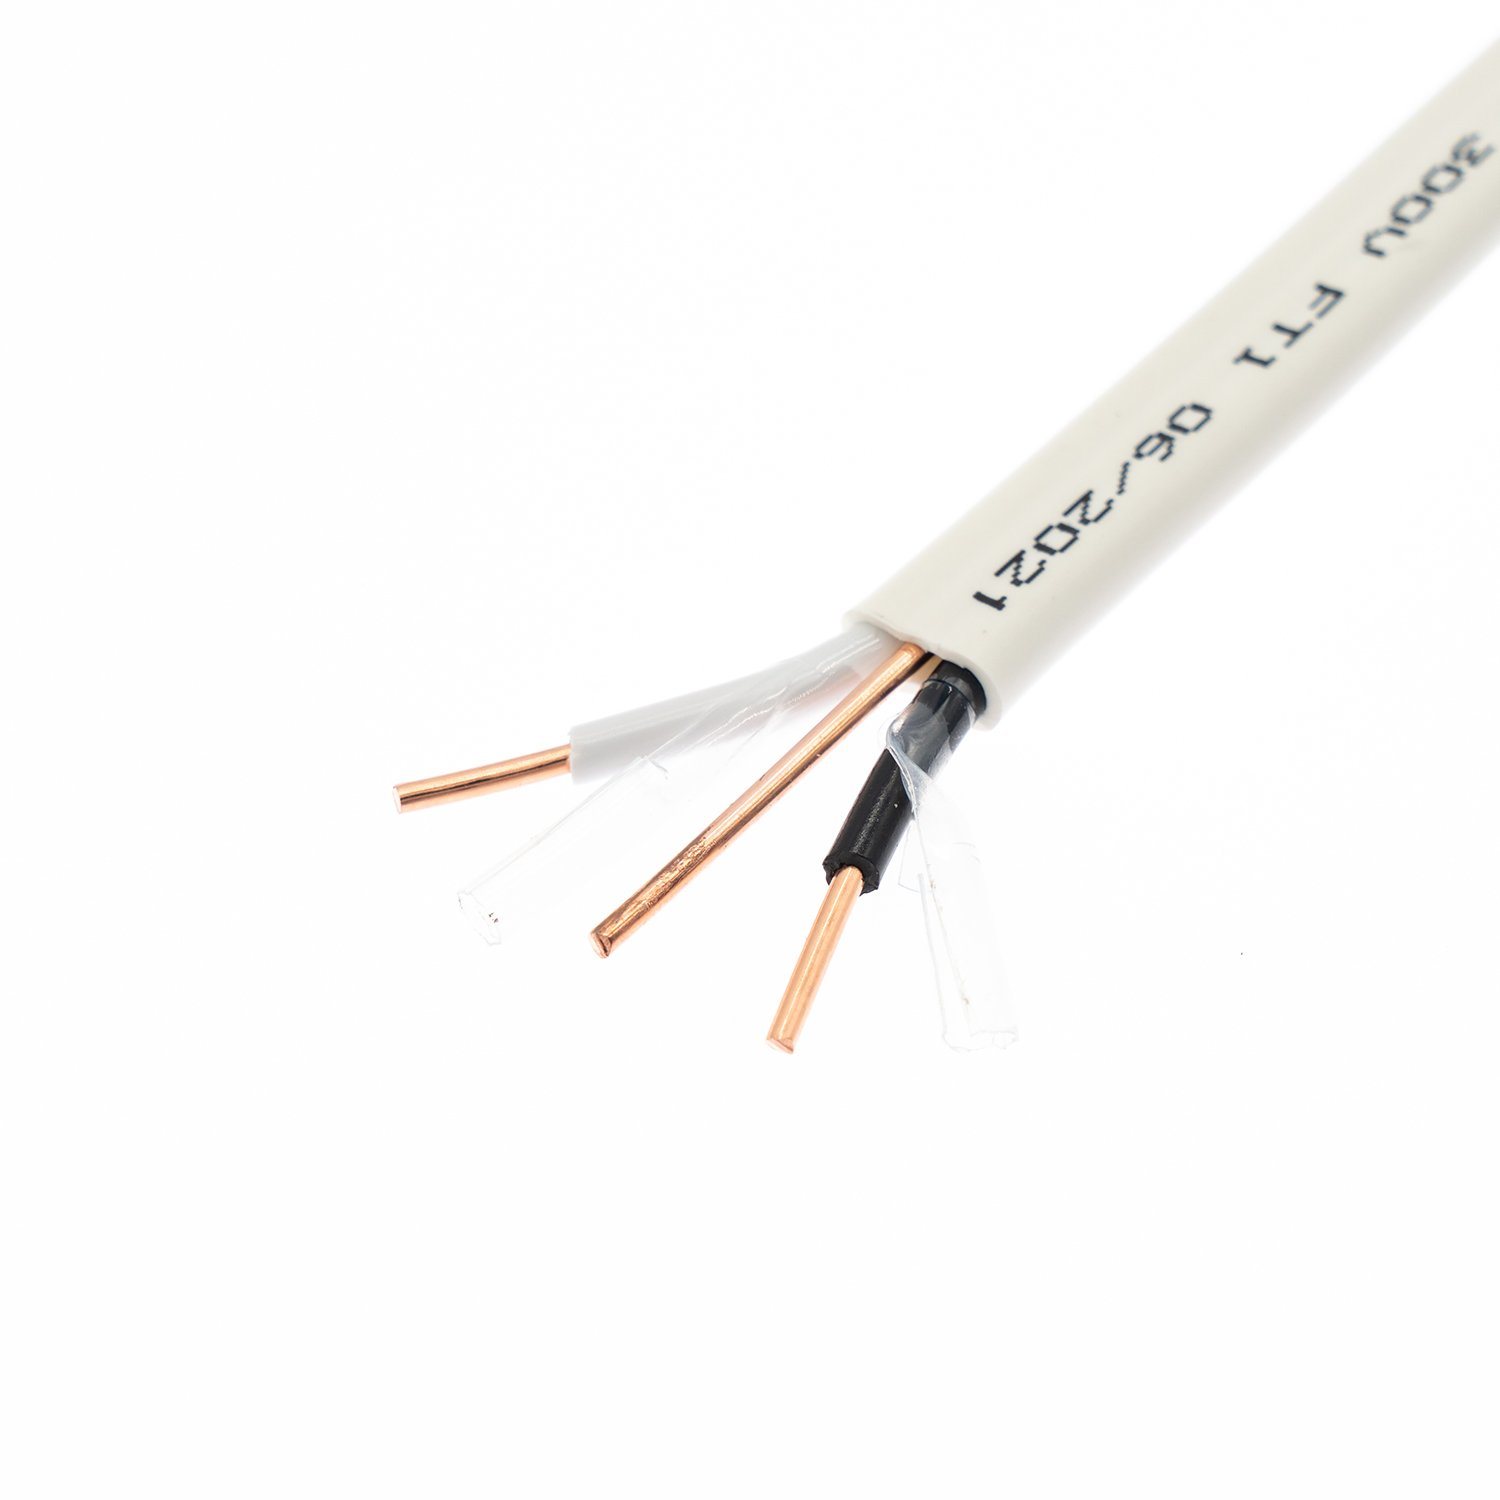 Stranded Building 10-2 Housing PVC Electric Copper Electrical Nonmetallic-Sheathed Nmd90 Cable Wire